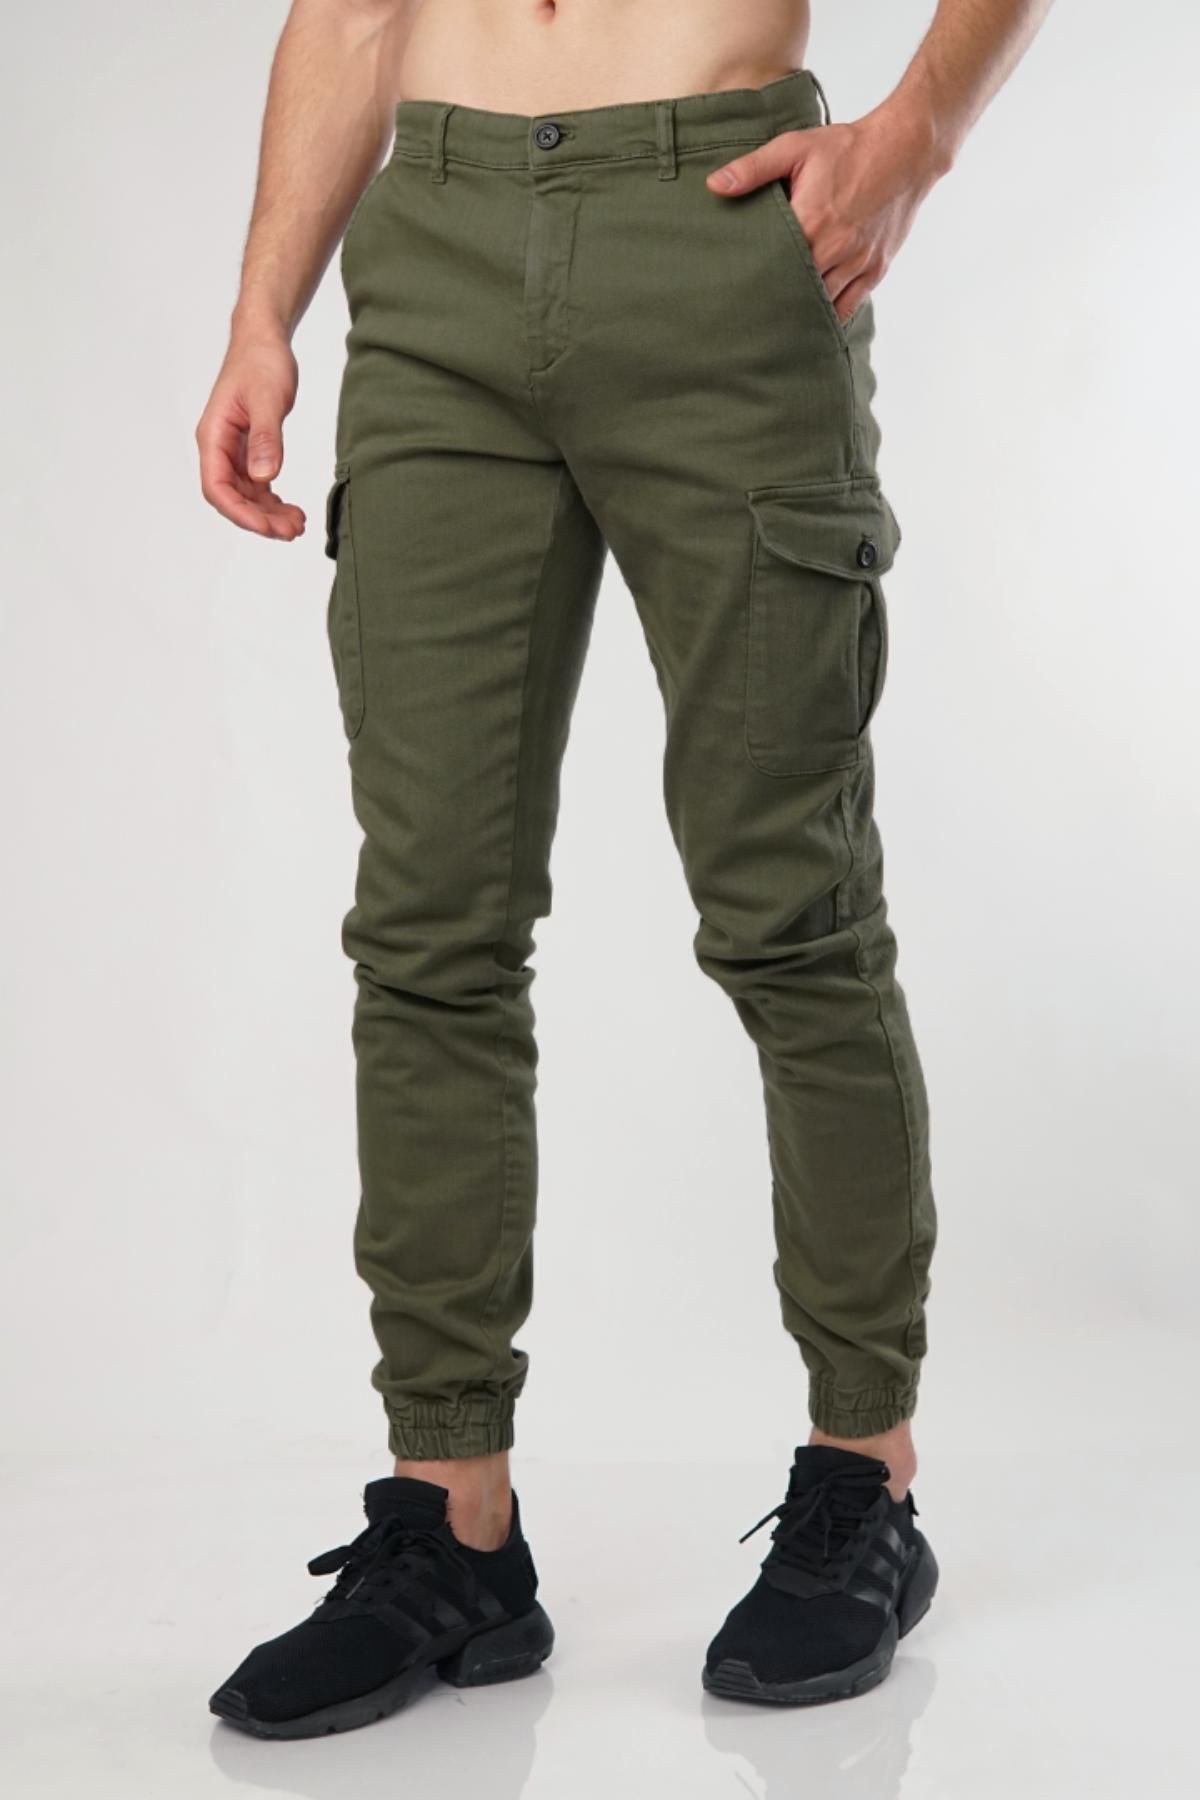 Empyre Loose Fit Olive Cargo Skate Pants | Mall of America®